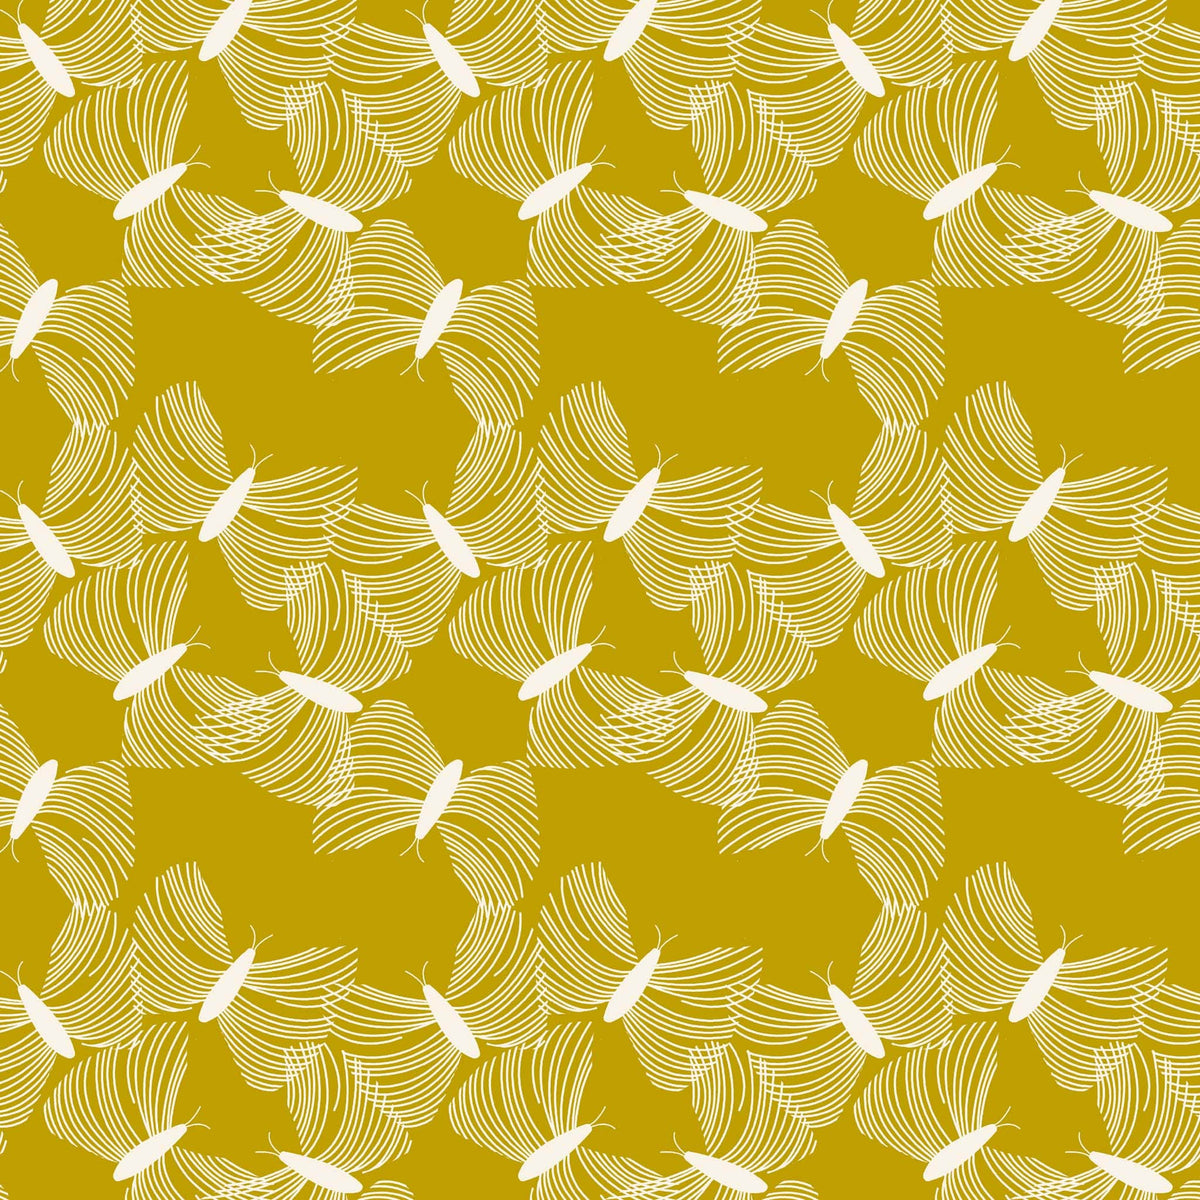 Whispy Butterflies Fabric